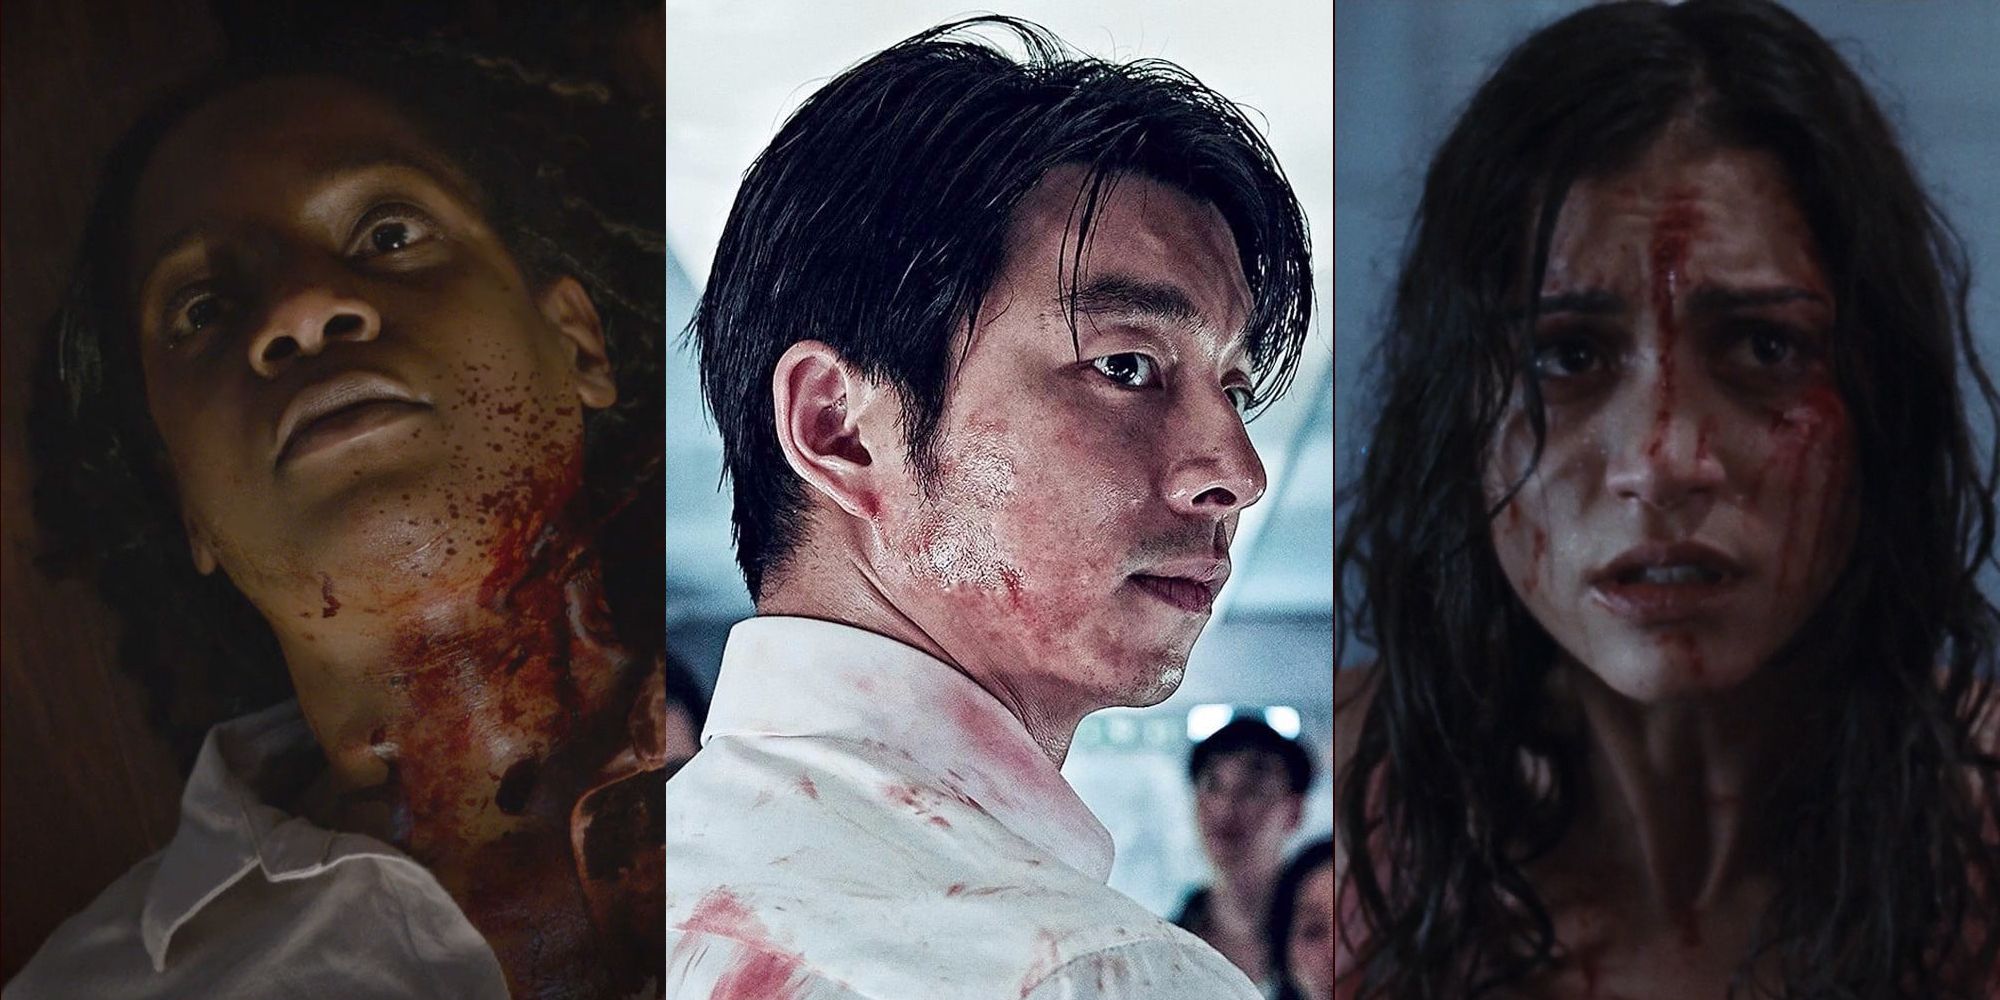 Gory horror movies: Legion, Train to Busan, ,and Martyrs.